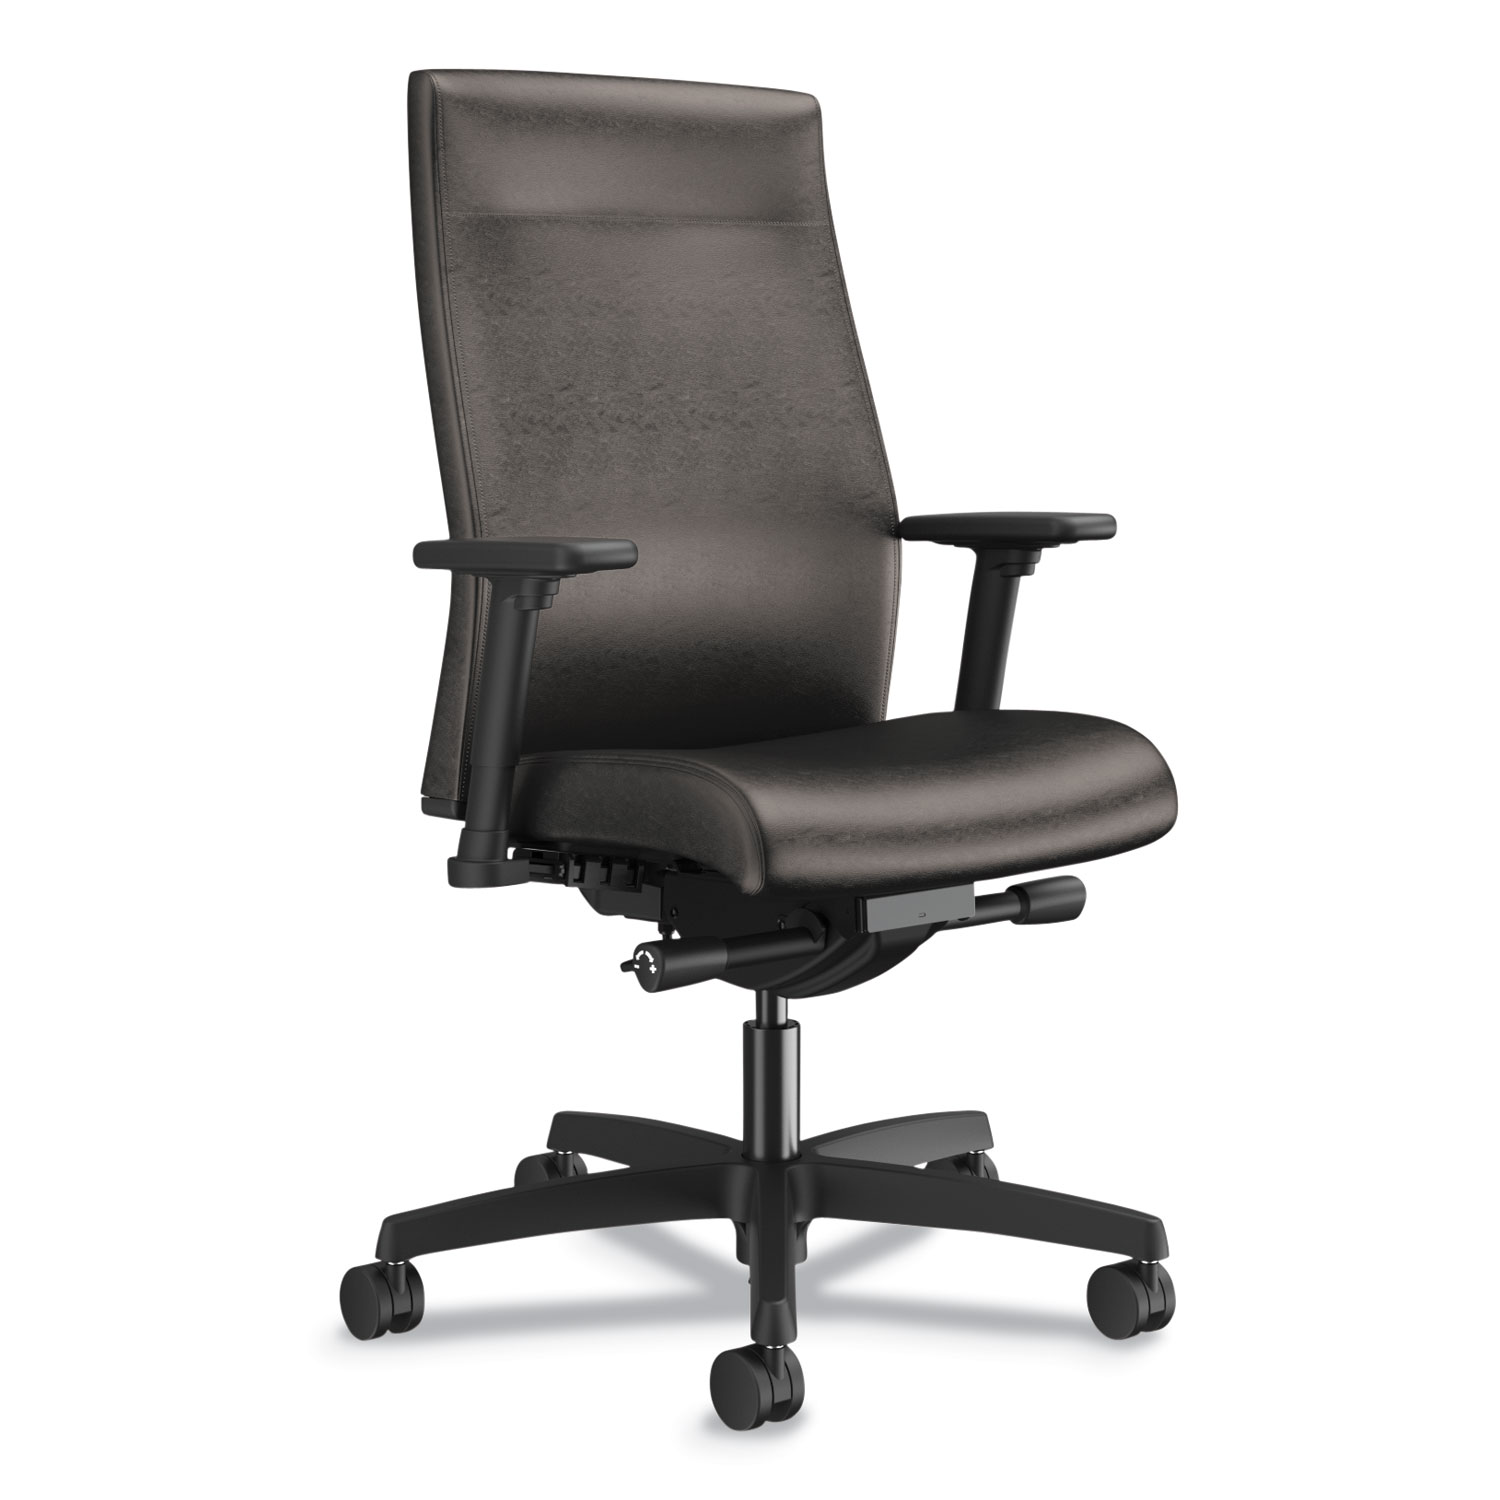  HON HONI2UL2AU10TK Ignition 2.0 Upholstered Mid-Back Task Chair With Lumbar, Supports up to 300 lbs., Vinyl, Black Seat, Black Back, Black Base (HONI2UL2AU10TK) 